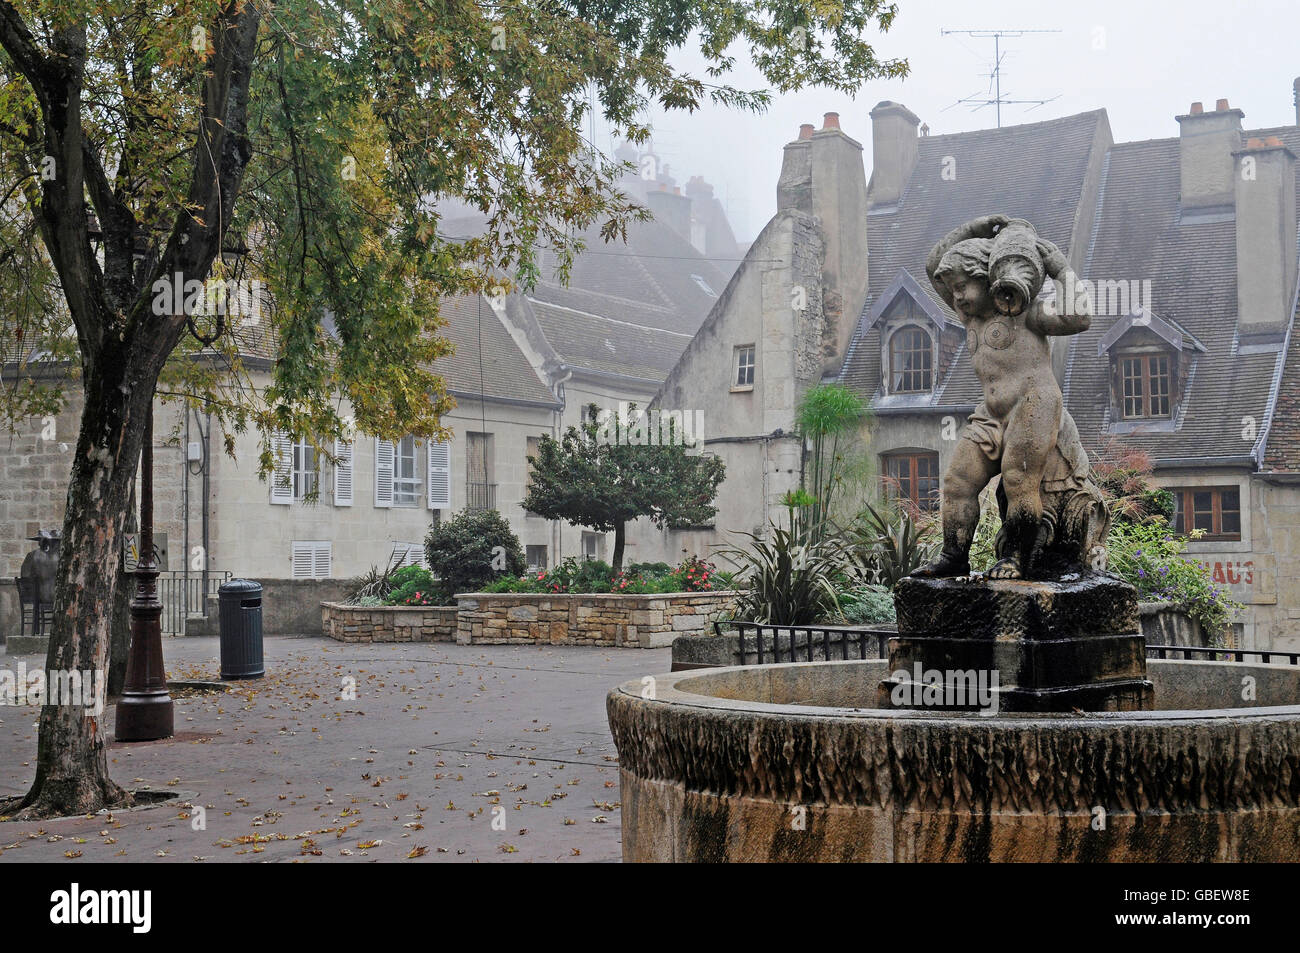 Fountain, old town, Dole, Franche-Comte, France Stock Photo